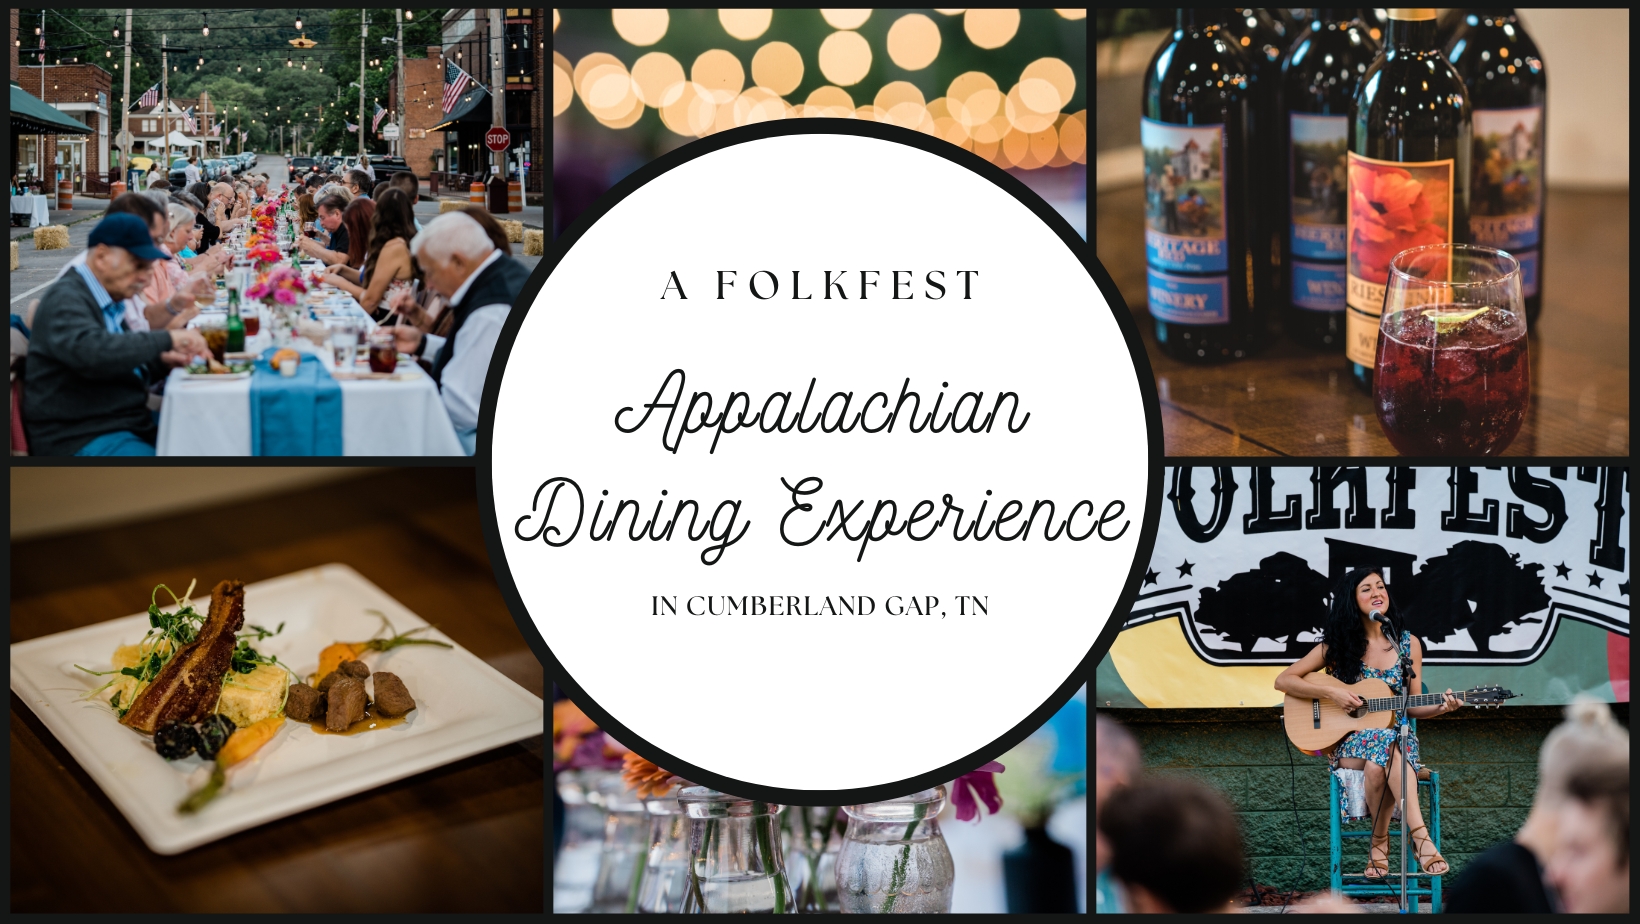 A FolkFest Appalachian Dining Experience cover image